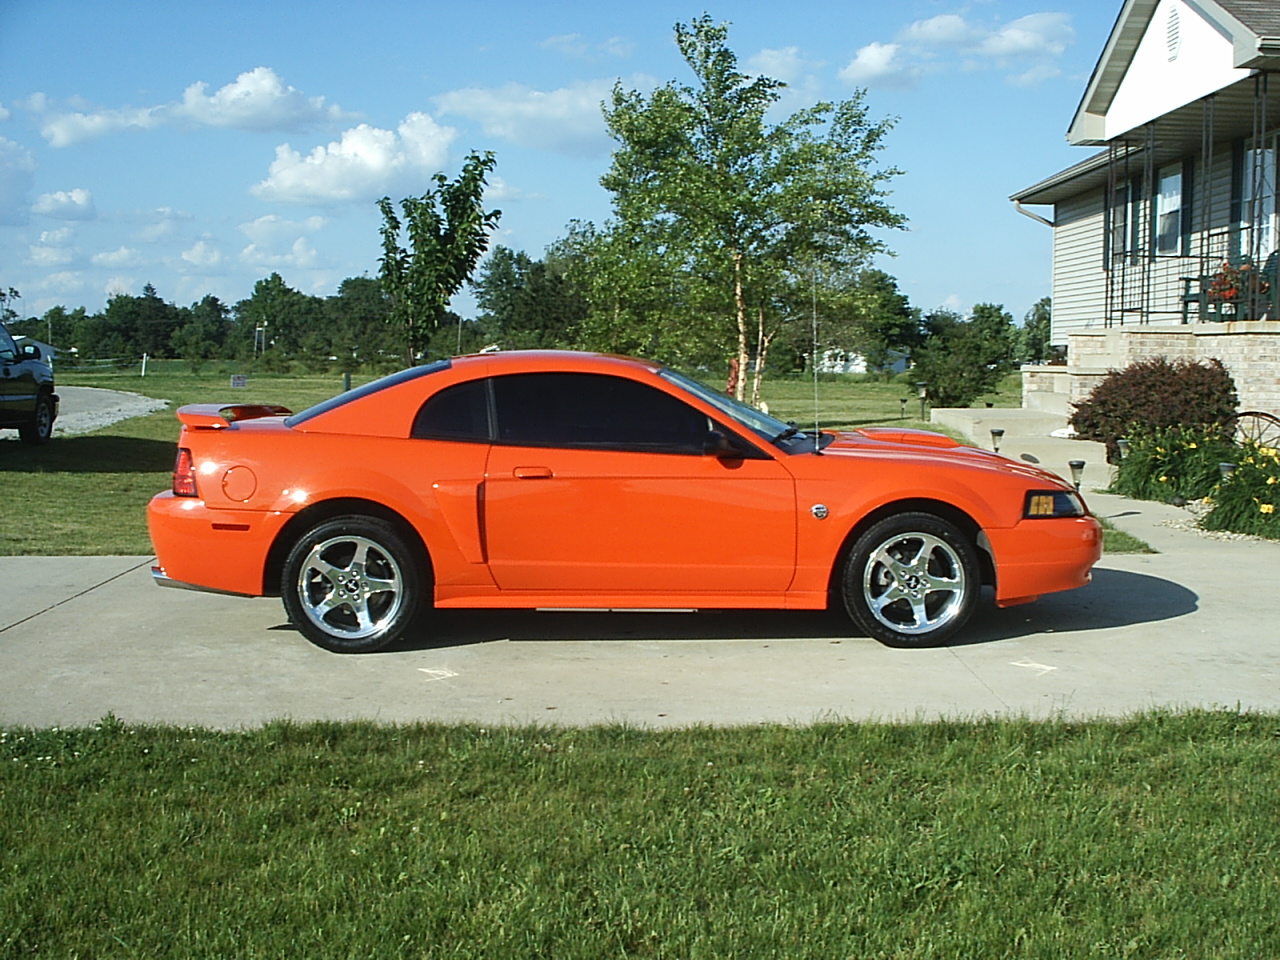 What is the horsepower of a 2004 ford mustang gt